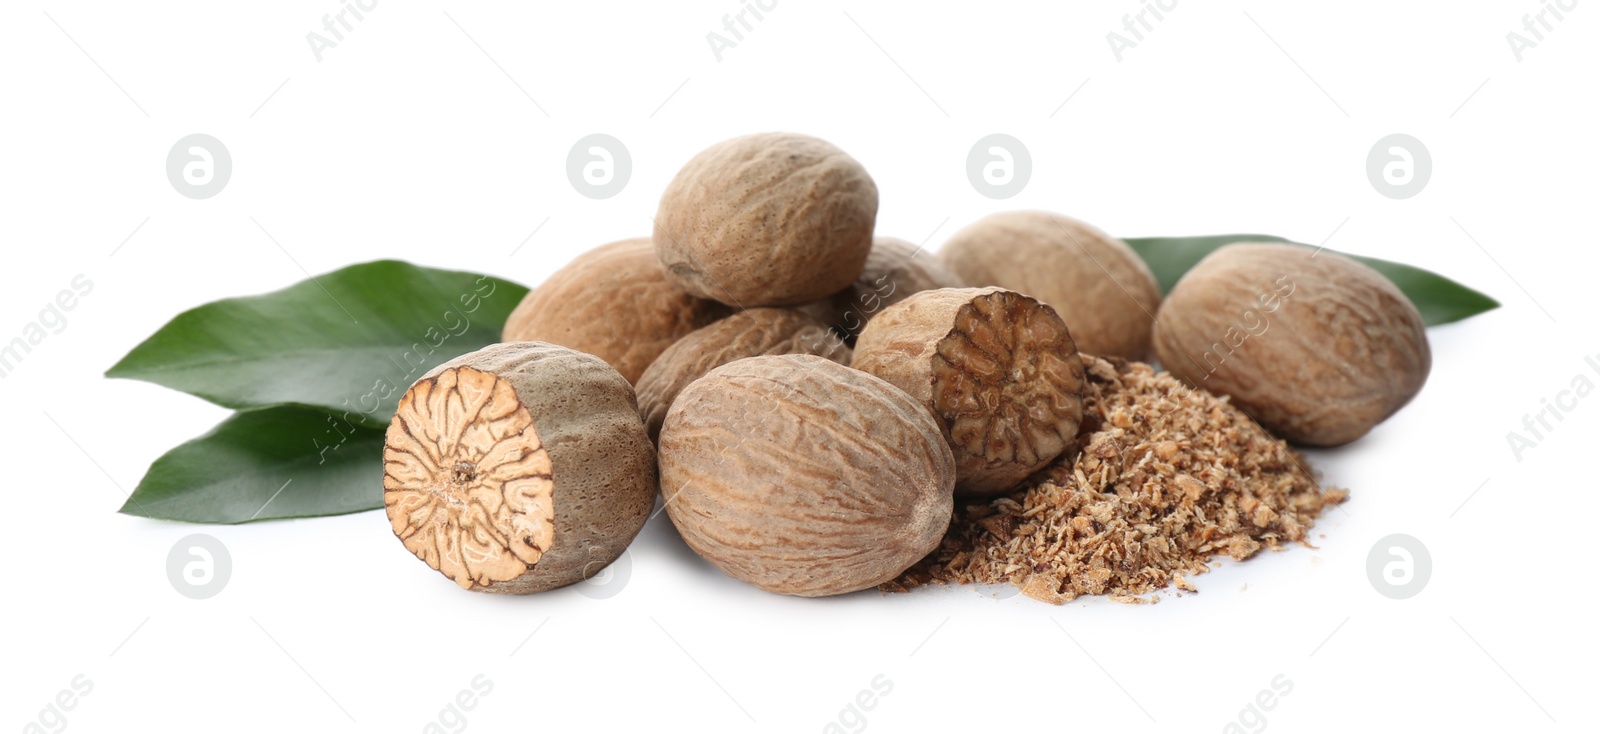 Photo of Grated nutmeg and seeds with green leaves on white background